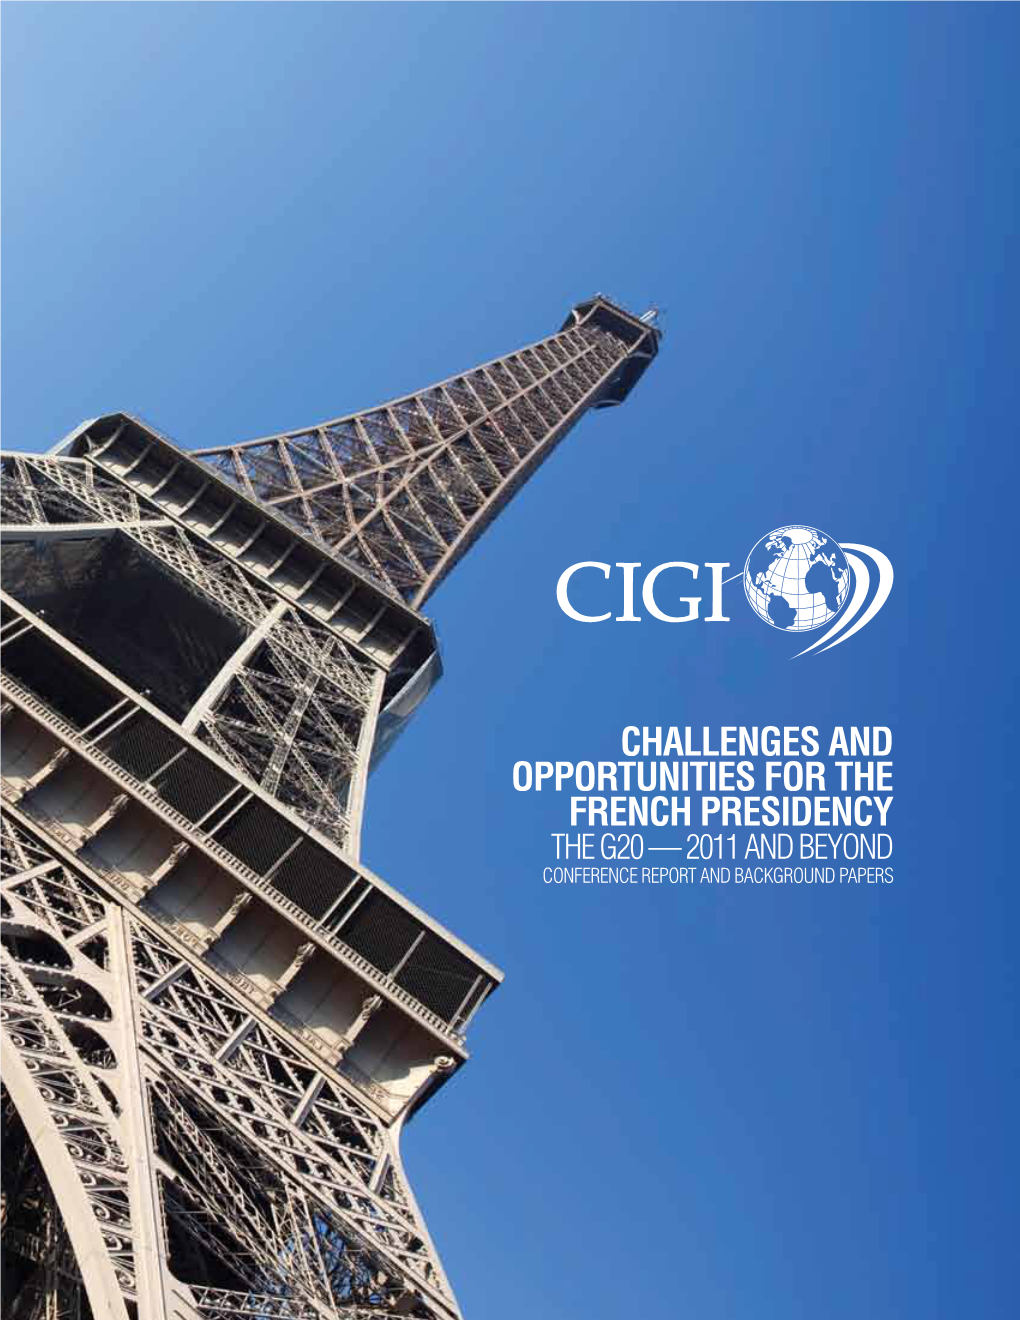 Challenges and Opportunities for the French Presidency the G20 — 2011 and Beyond Conference Report and Background Papers